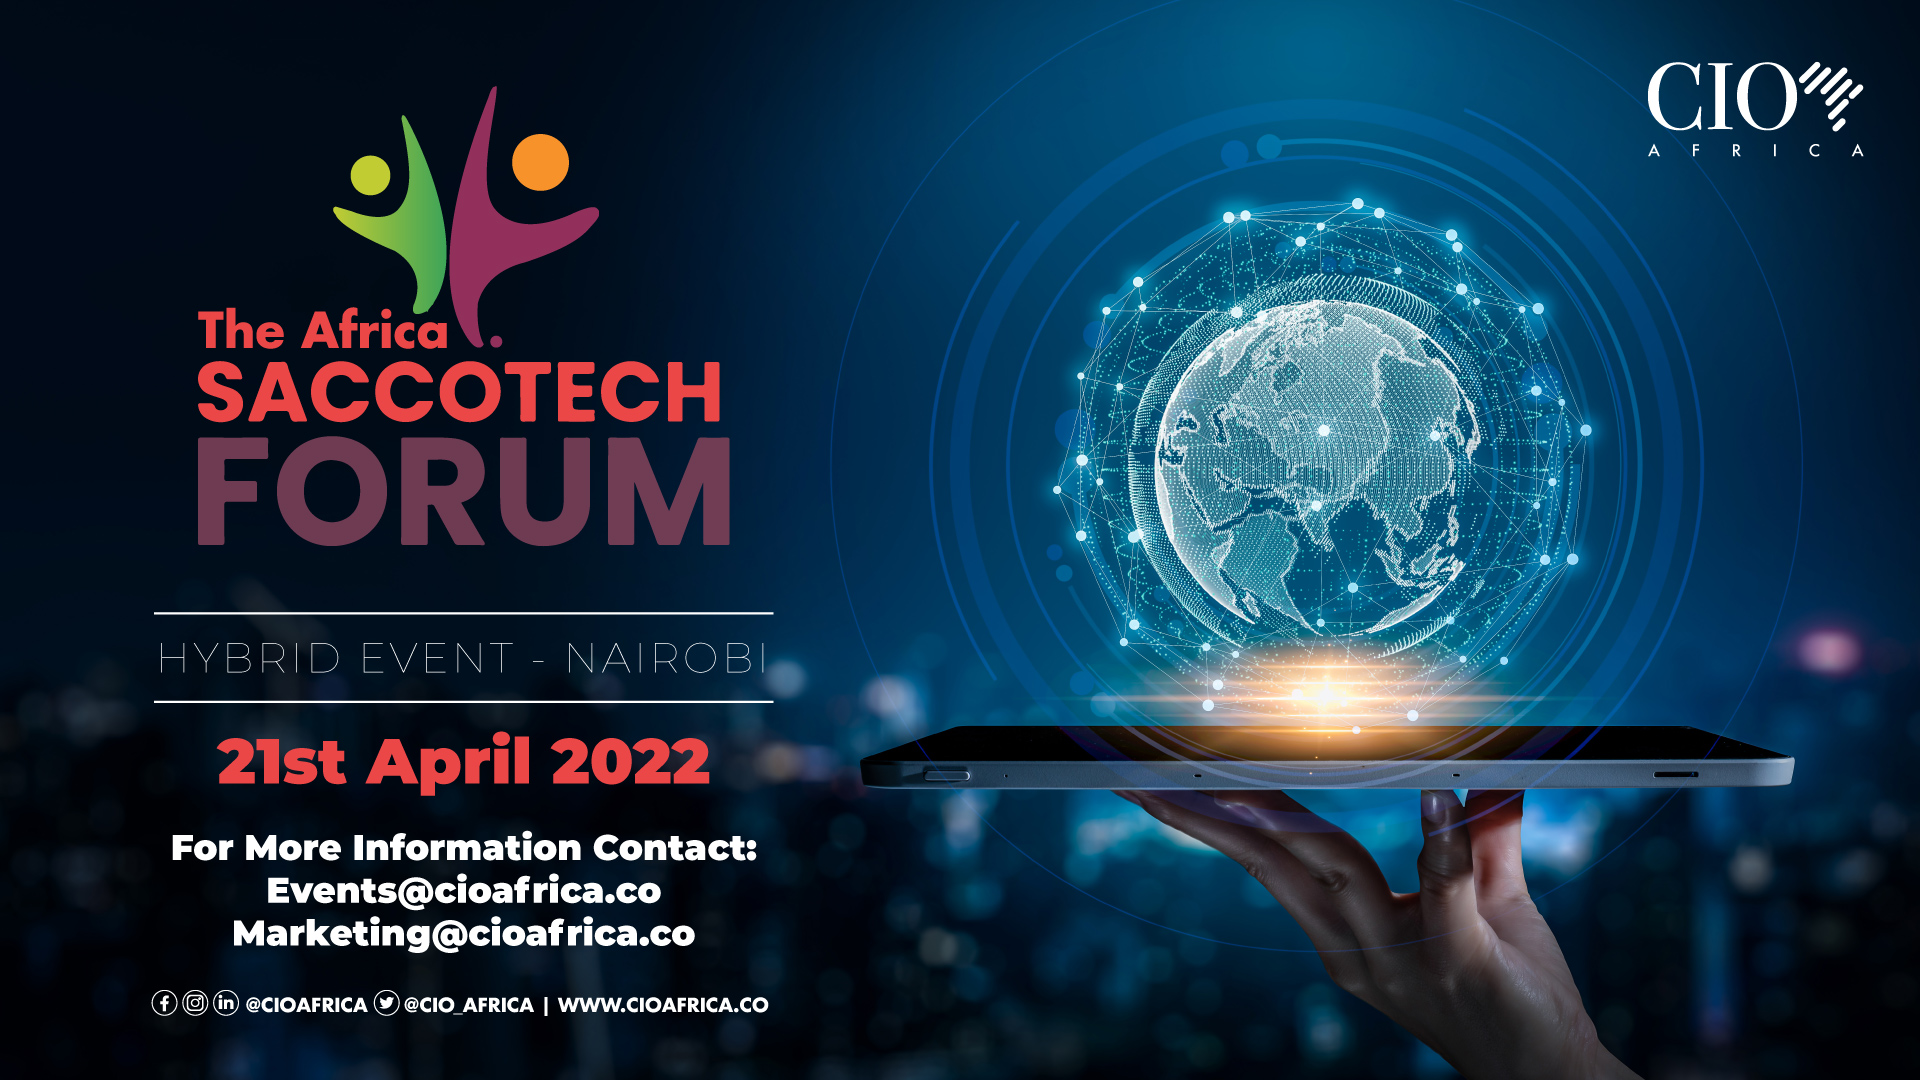 Saccos And Technology To Be Brought Together At The Africa SaccoTech Forum